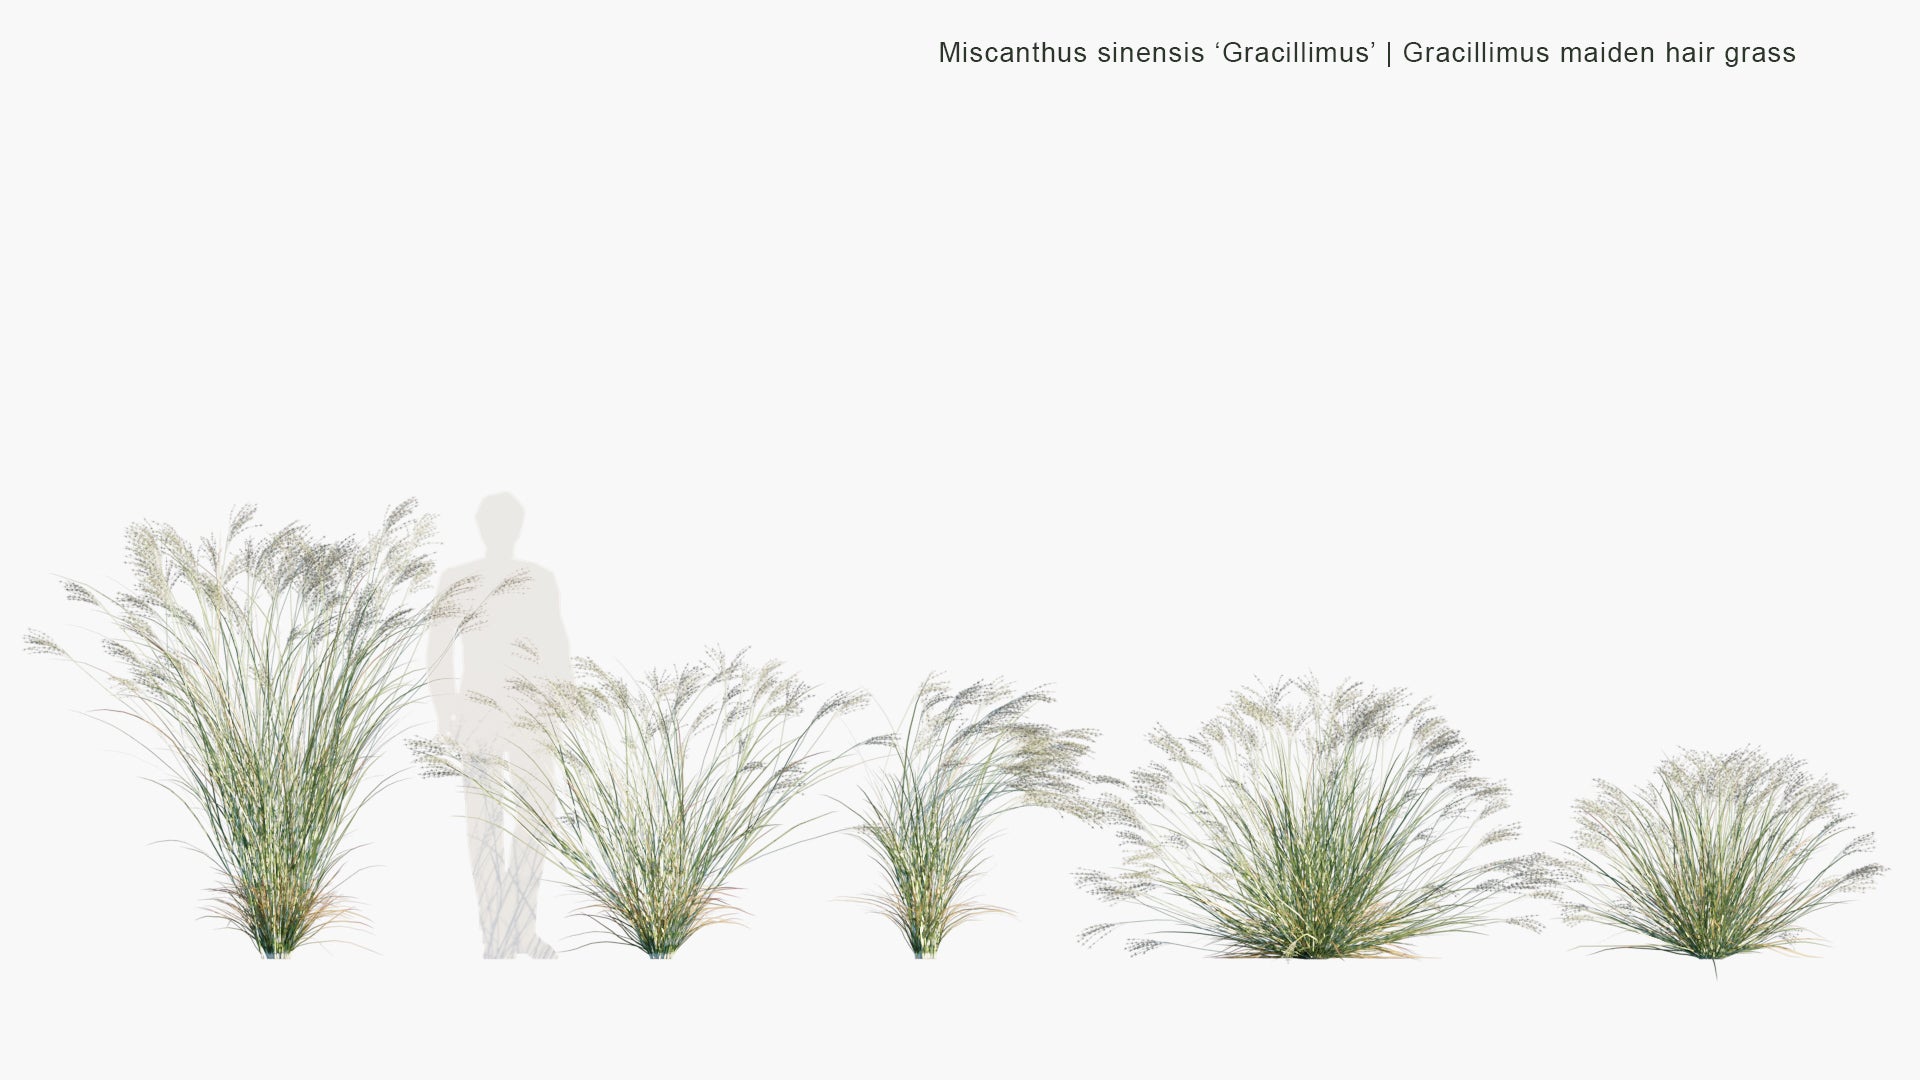 Low Poly Miscanthus Sinensis 'Gracillimus' - Gracillimus Maiden Hair Grass (3D Model)